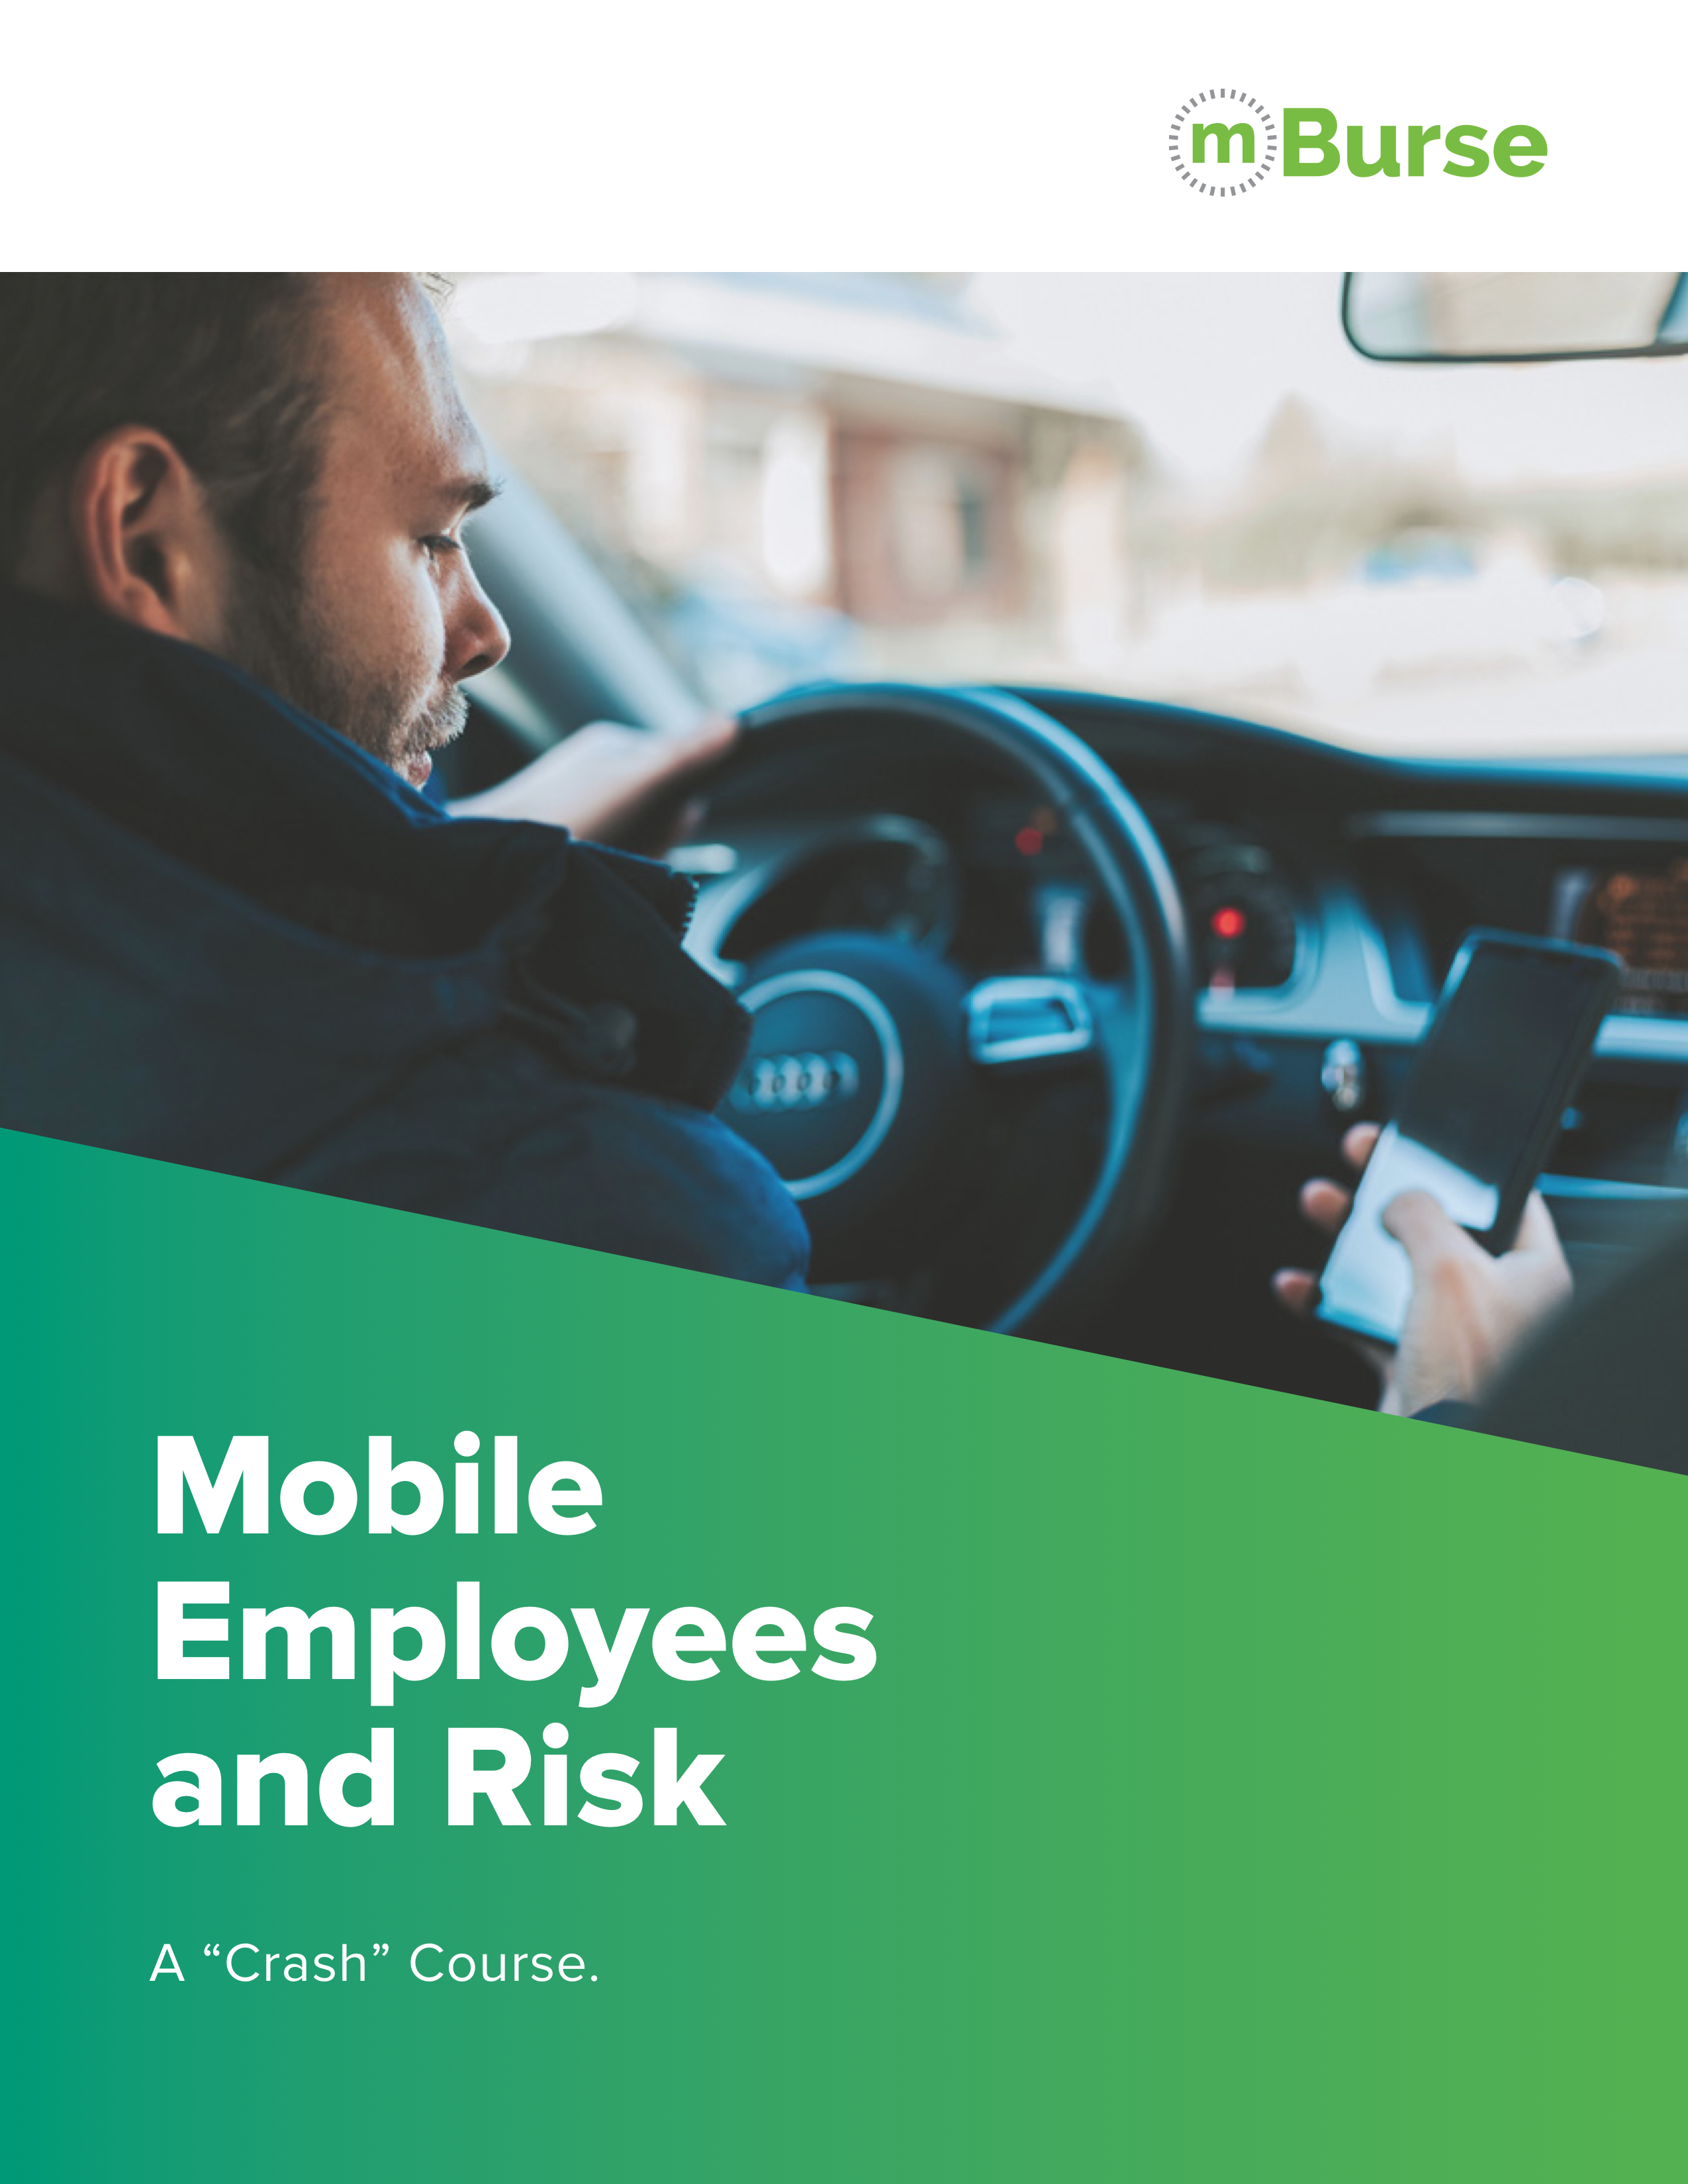 mBurse Mobile Employees and Risk eBook